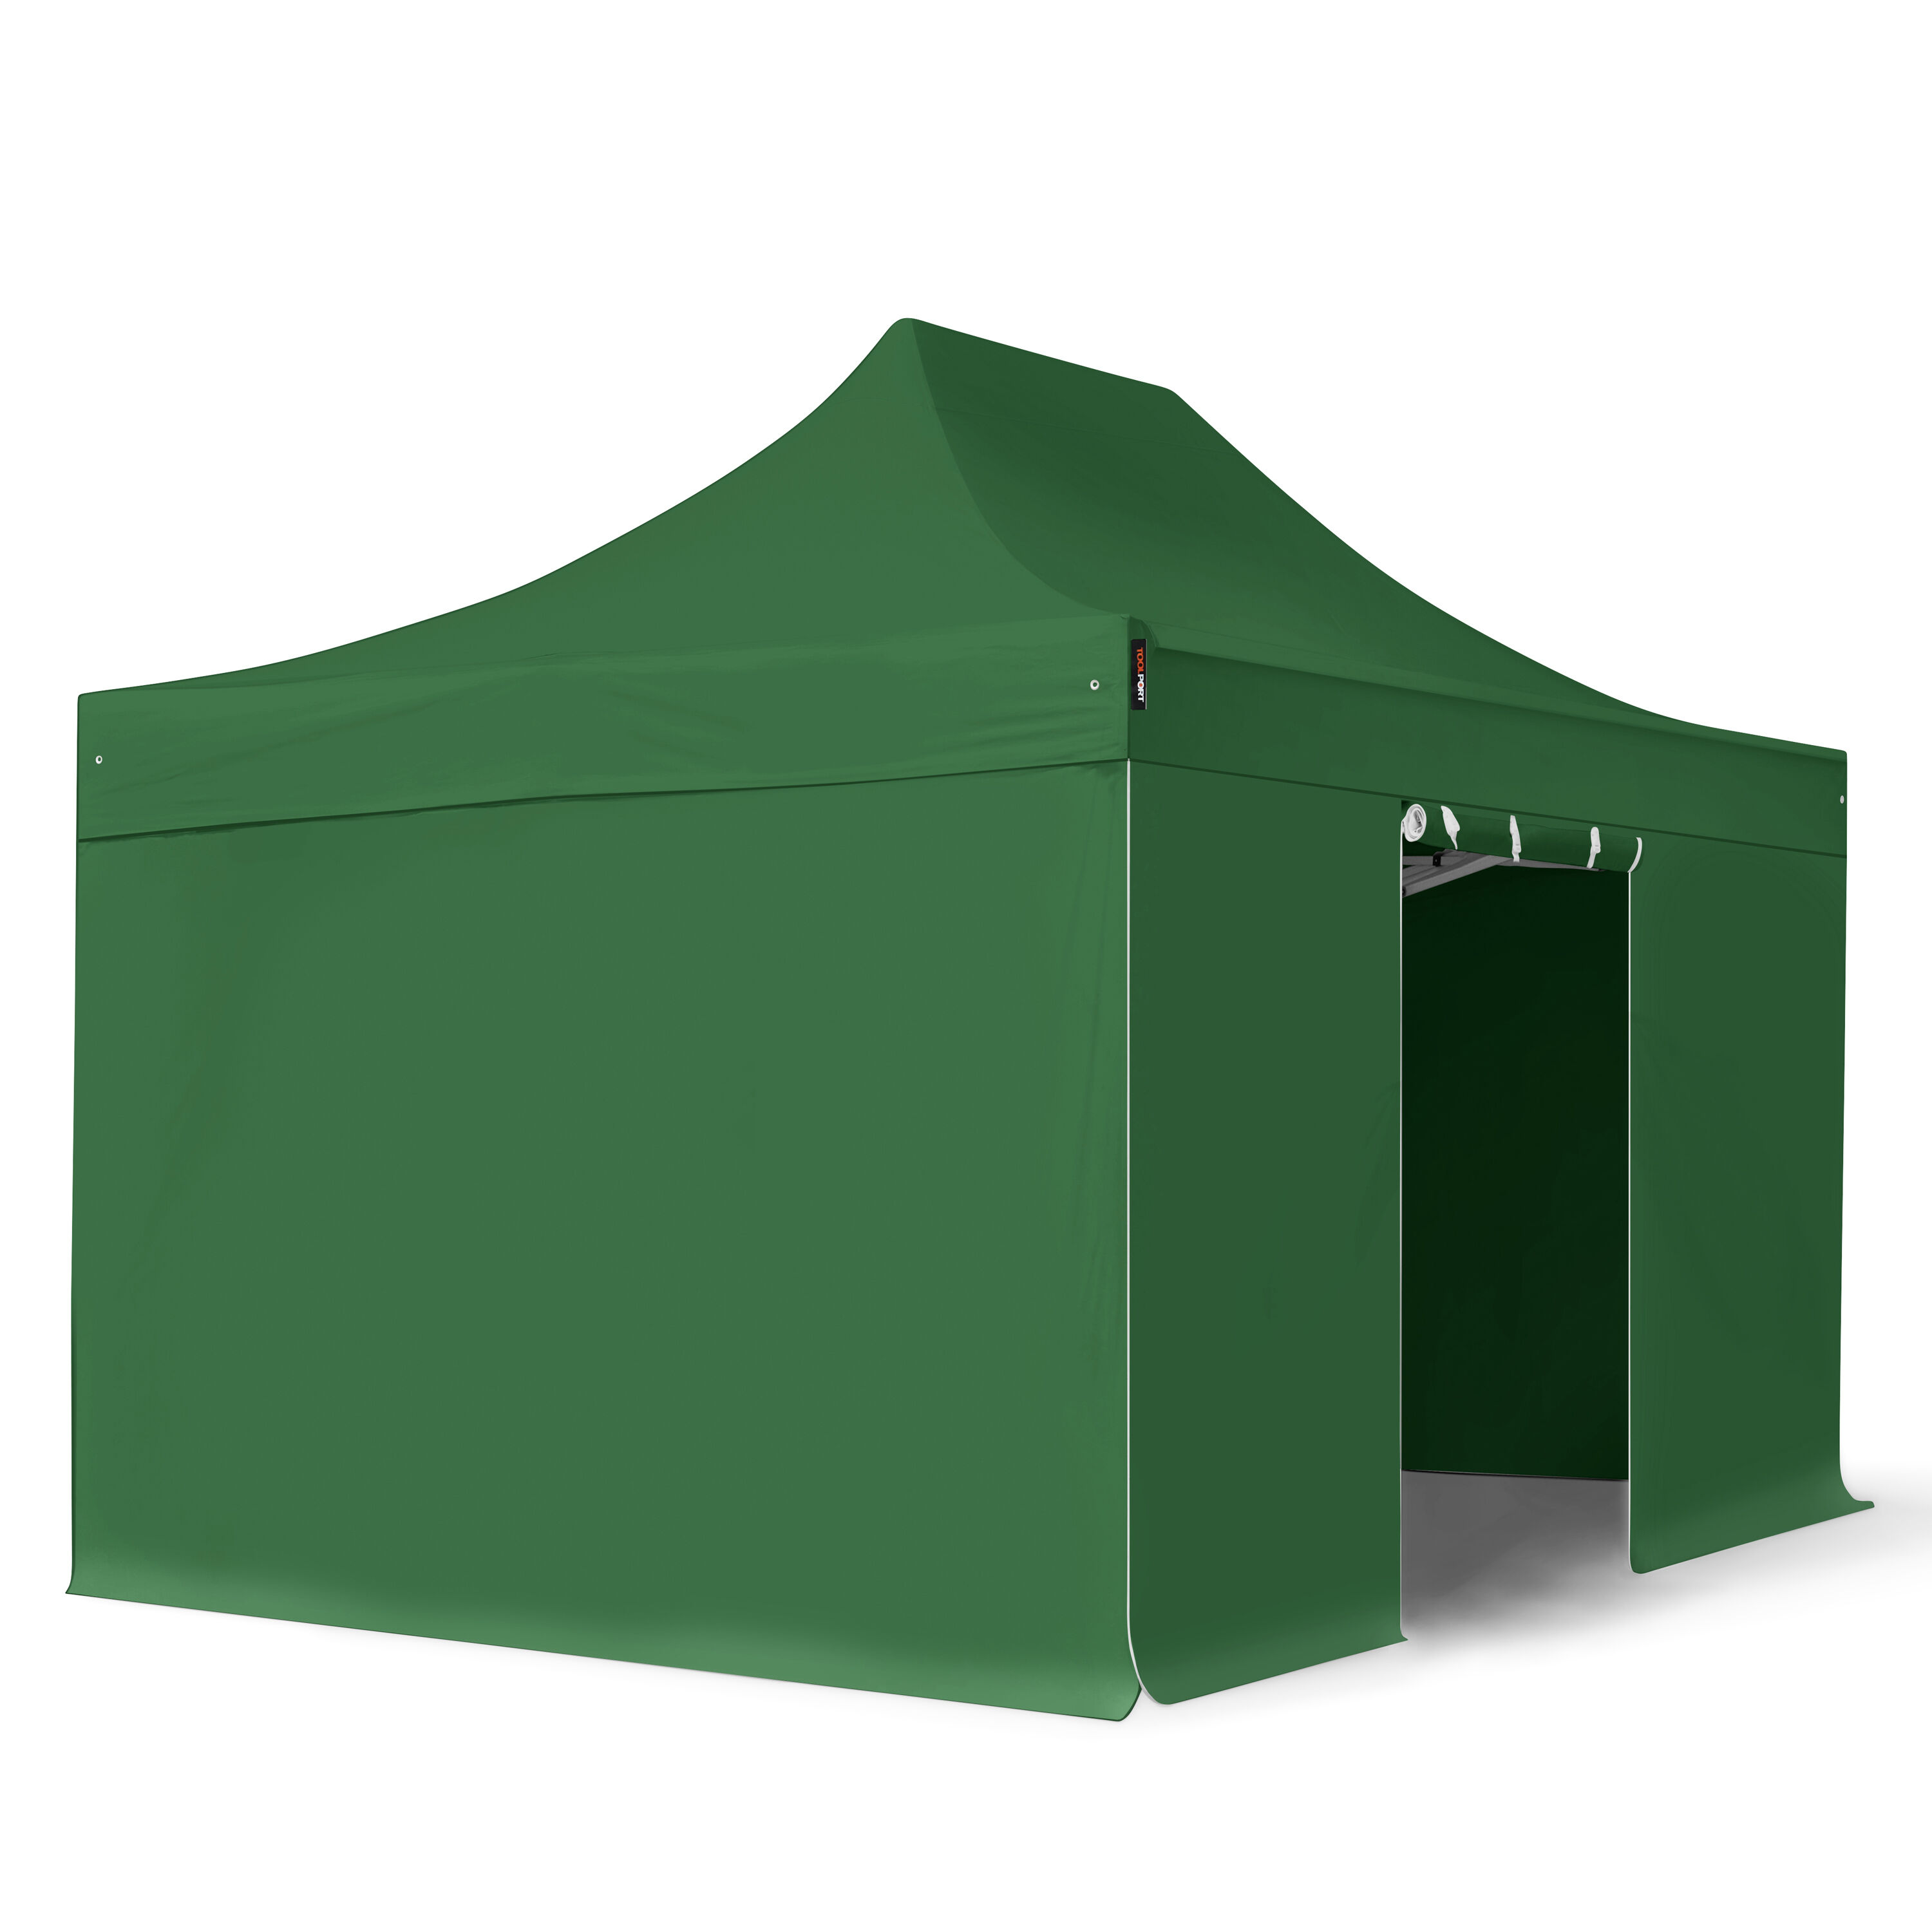 TOOLPORT Easy up Partytent 3x4,5m Hoogwaardig polyester 400 g/m² donkergroen waterdicht Easy Up Tent, Pop Up Partytent, Harmonicatent, Vouwtent